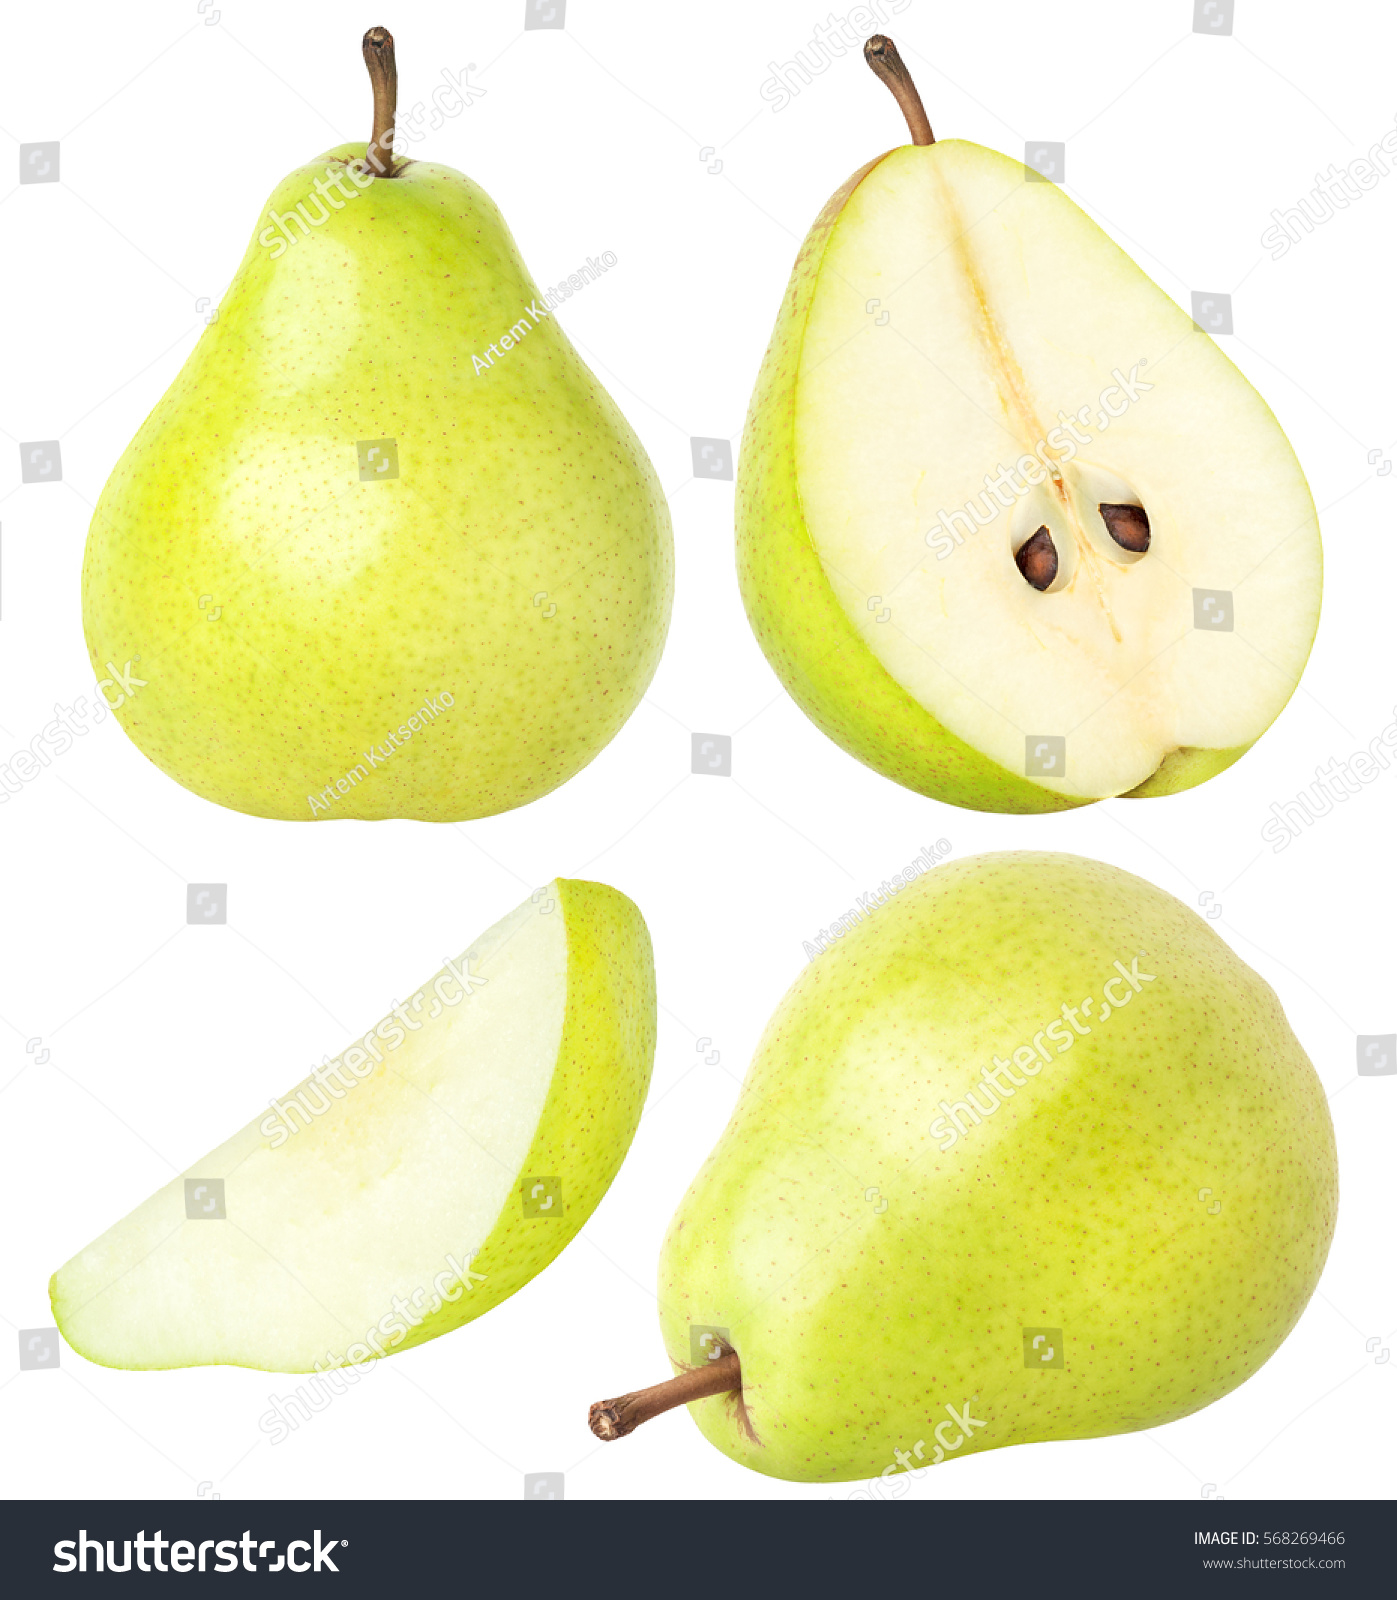 Isolated pears. Collection of whole and sliced pear fruits with leaves isolated on white with clipping path #568269466